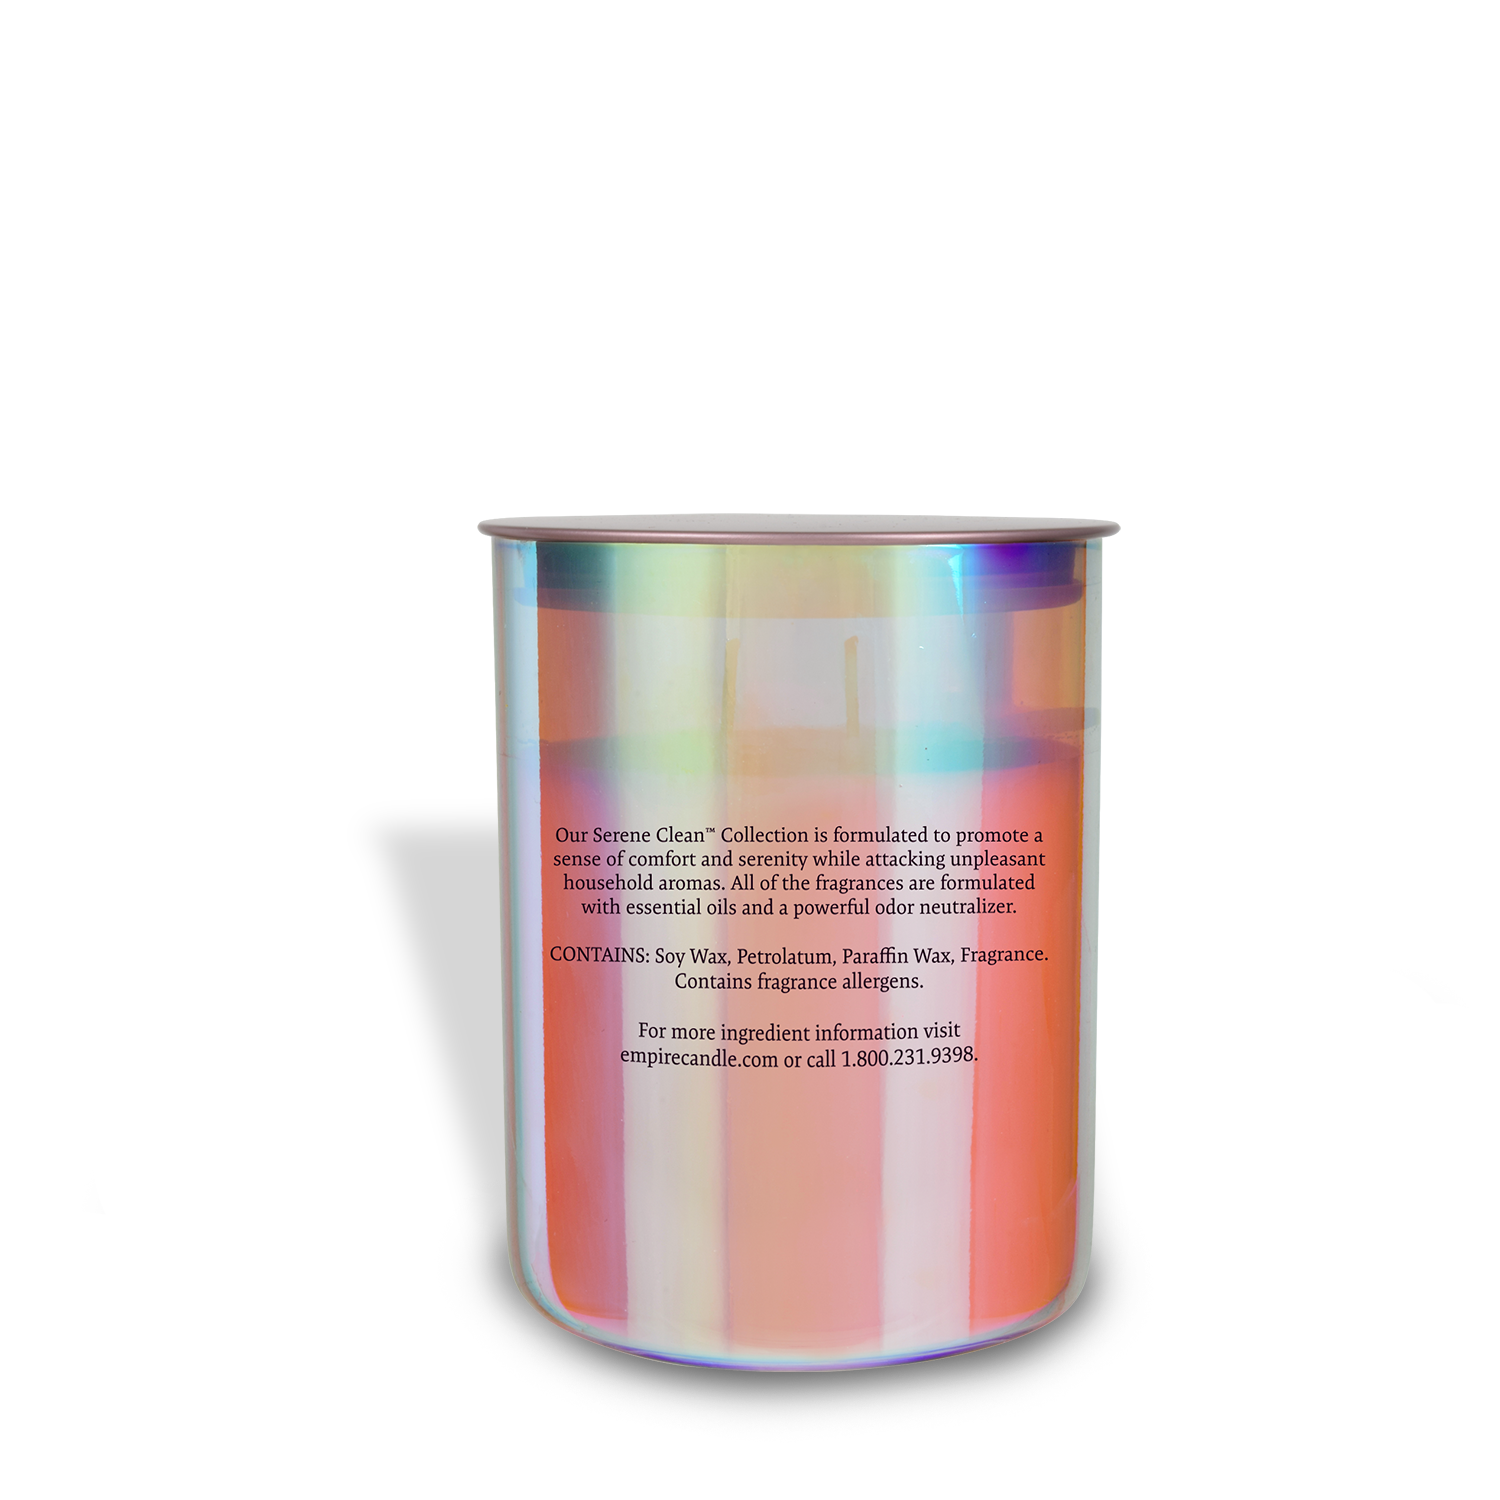 A tin container with an iridescent label on it, containing a Midnight Lavender Scented Jar Candle (12 oz) from Tuscany Candle® EVD for odor control.